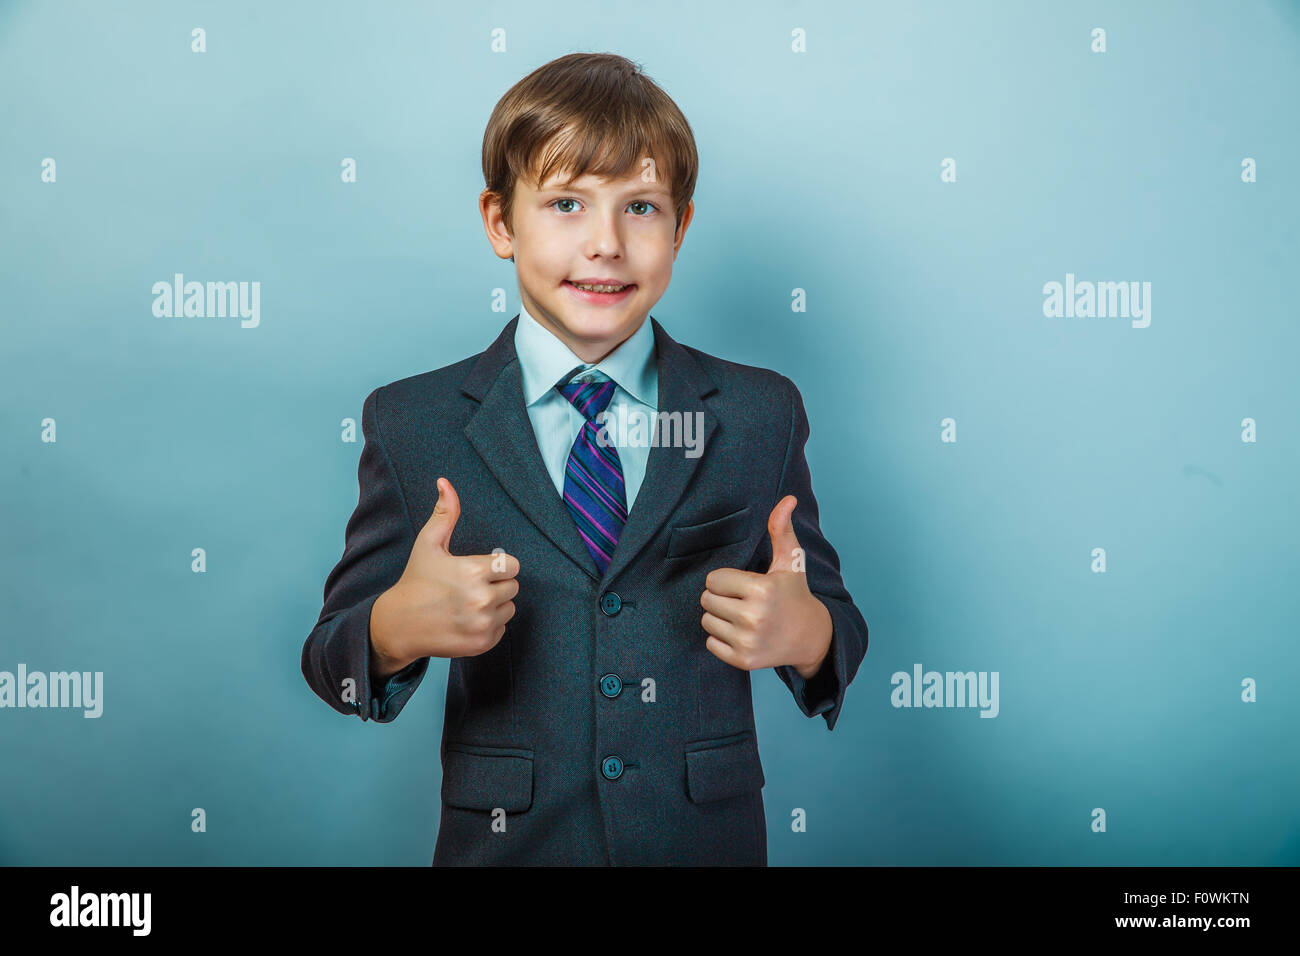 Teen boy businessman in a suit showing gesture yes thumbs up on Stock Photo